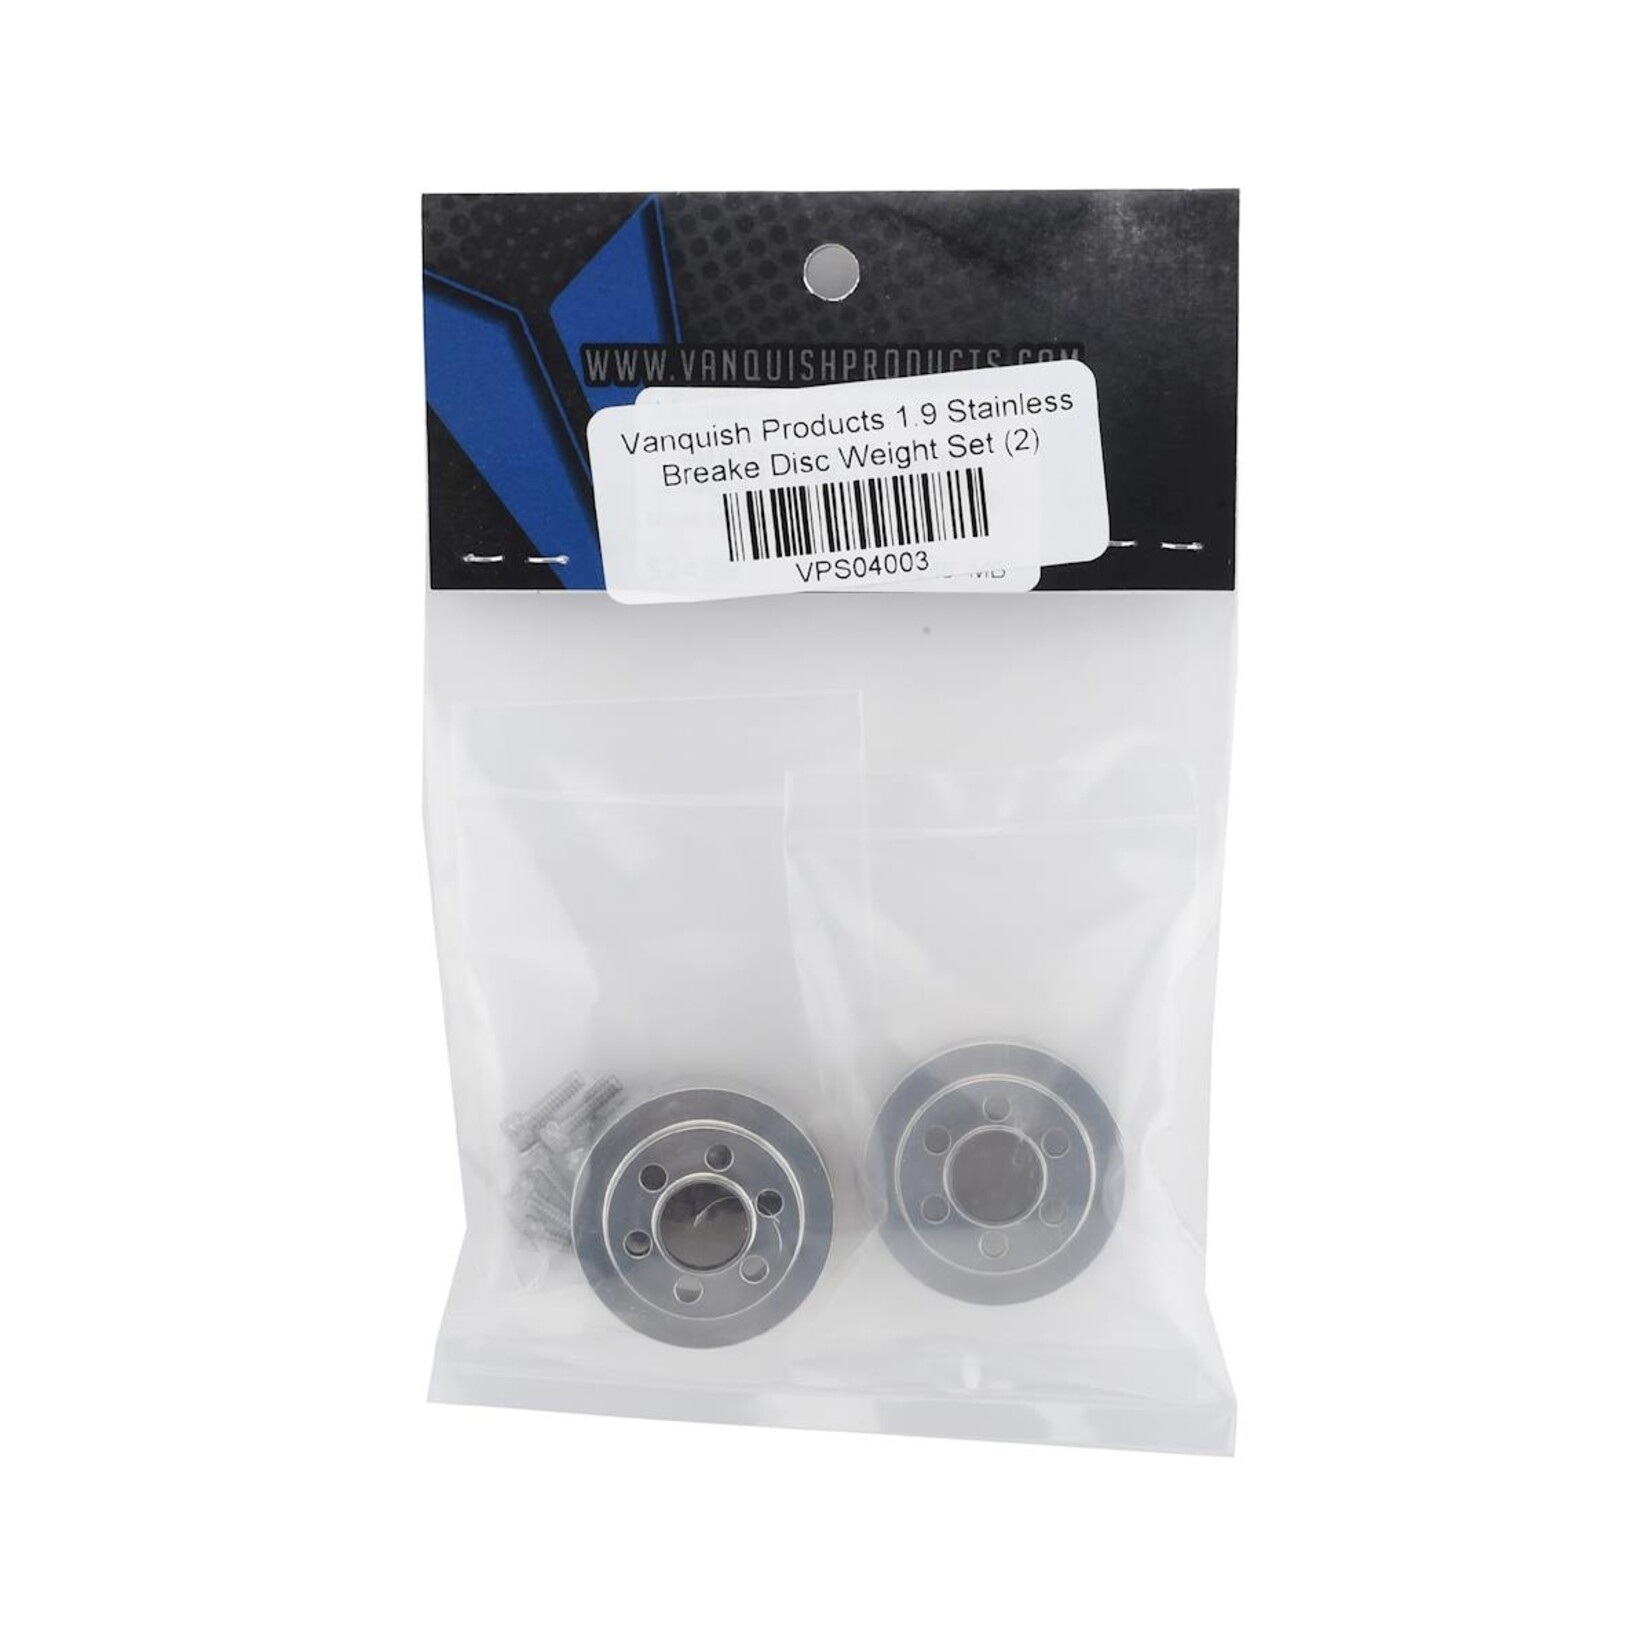 Vanquish Products Vanquish Products 1.9" Stainless Brake Disc Weight Set (2) #VPS04003